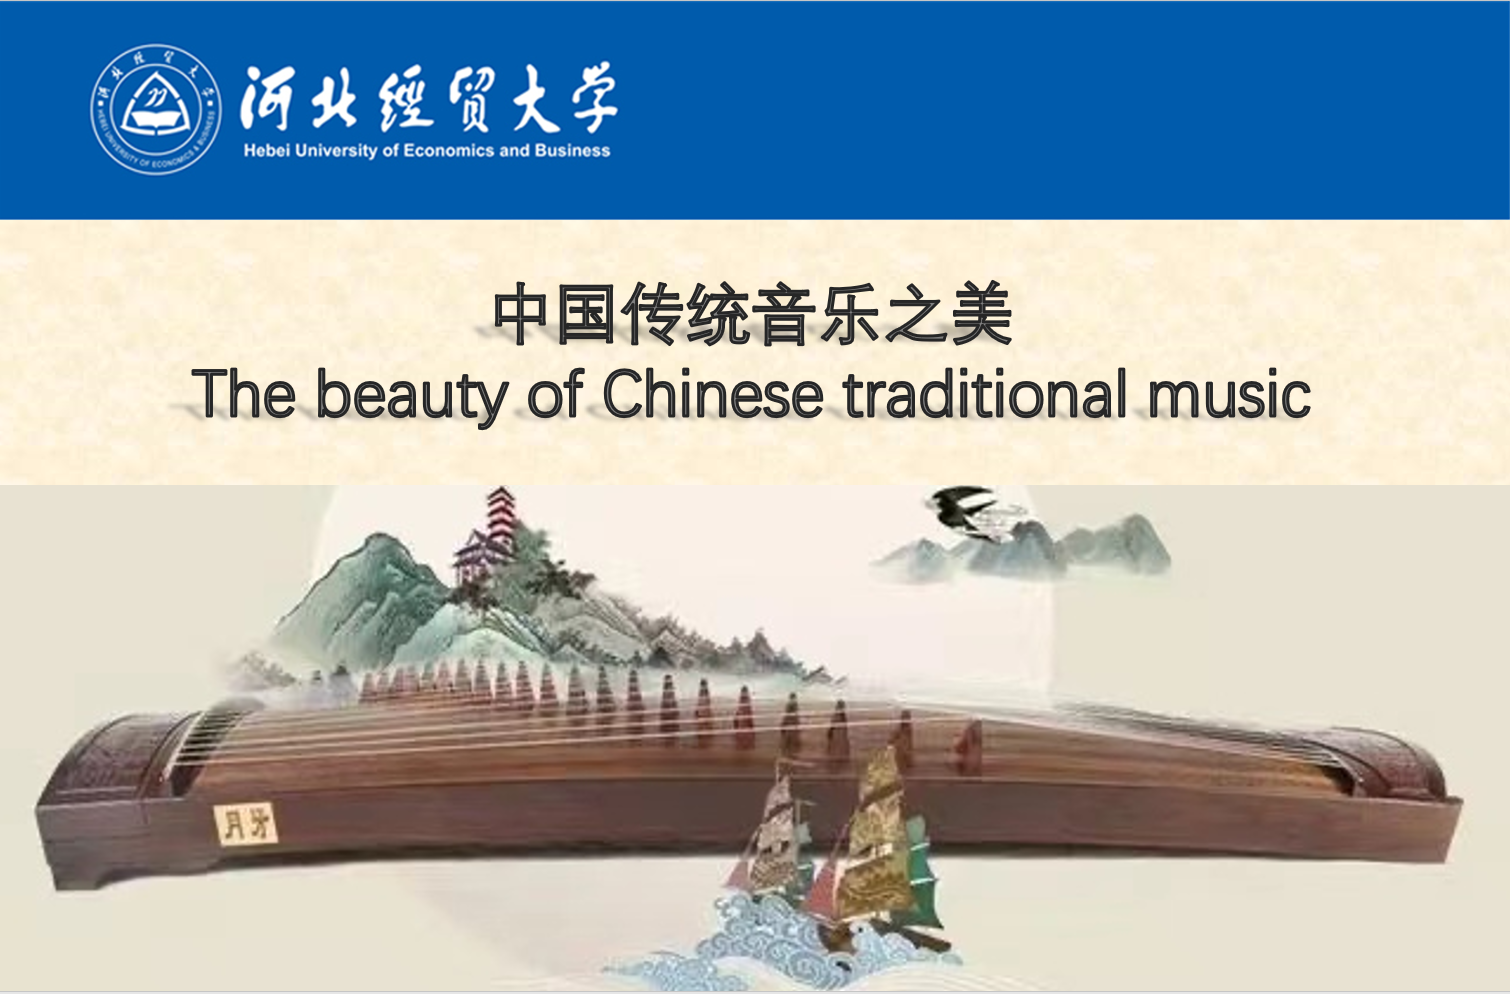 Experience the charm of Chinese traditional music